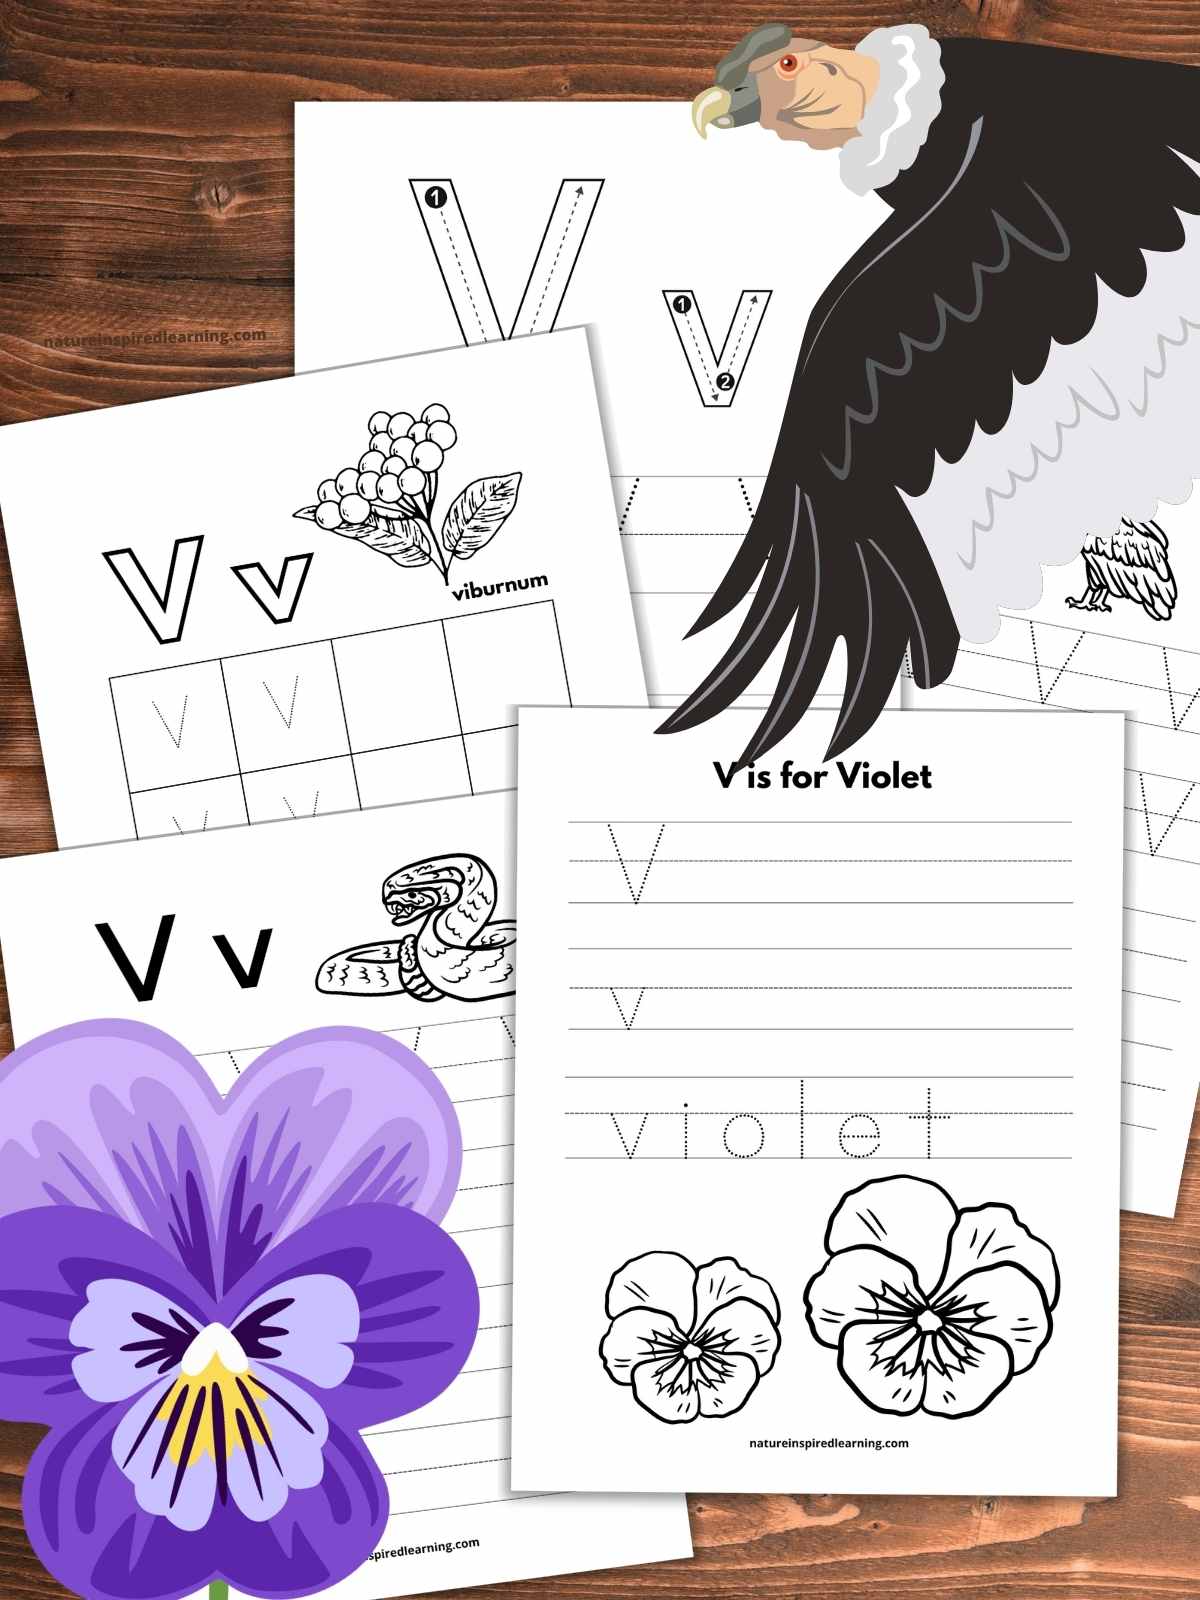 five worksheets with letter v tracing and images overlapping on a wooden background with a vulture upper right and purple violet bottom left